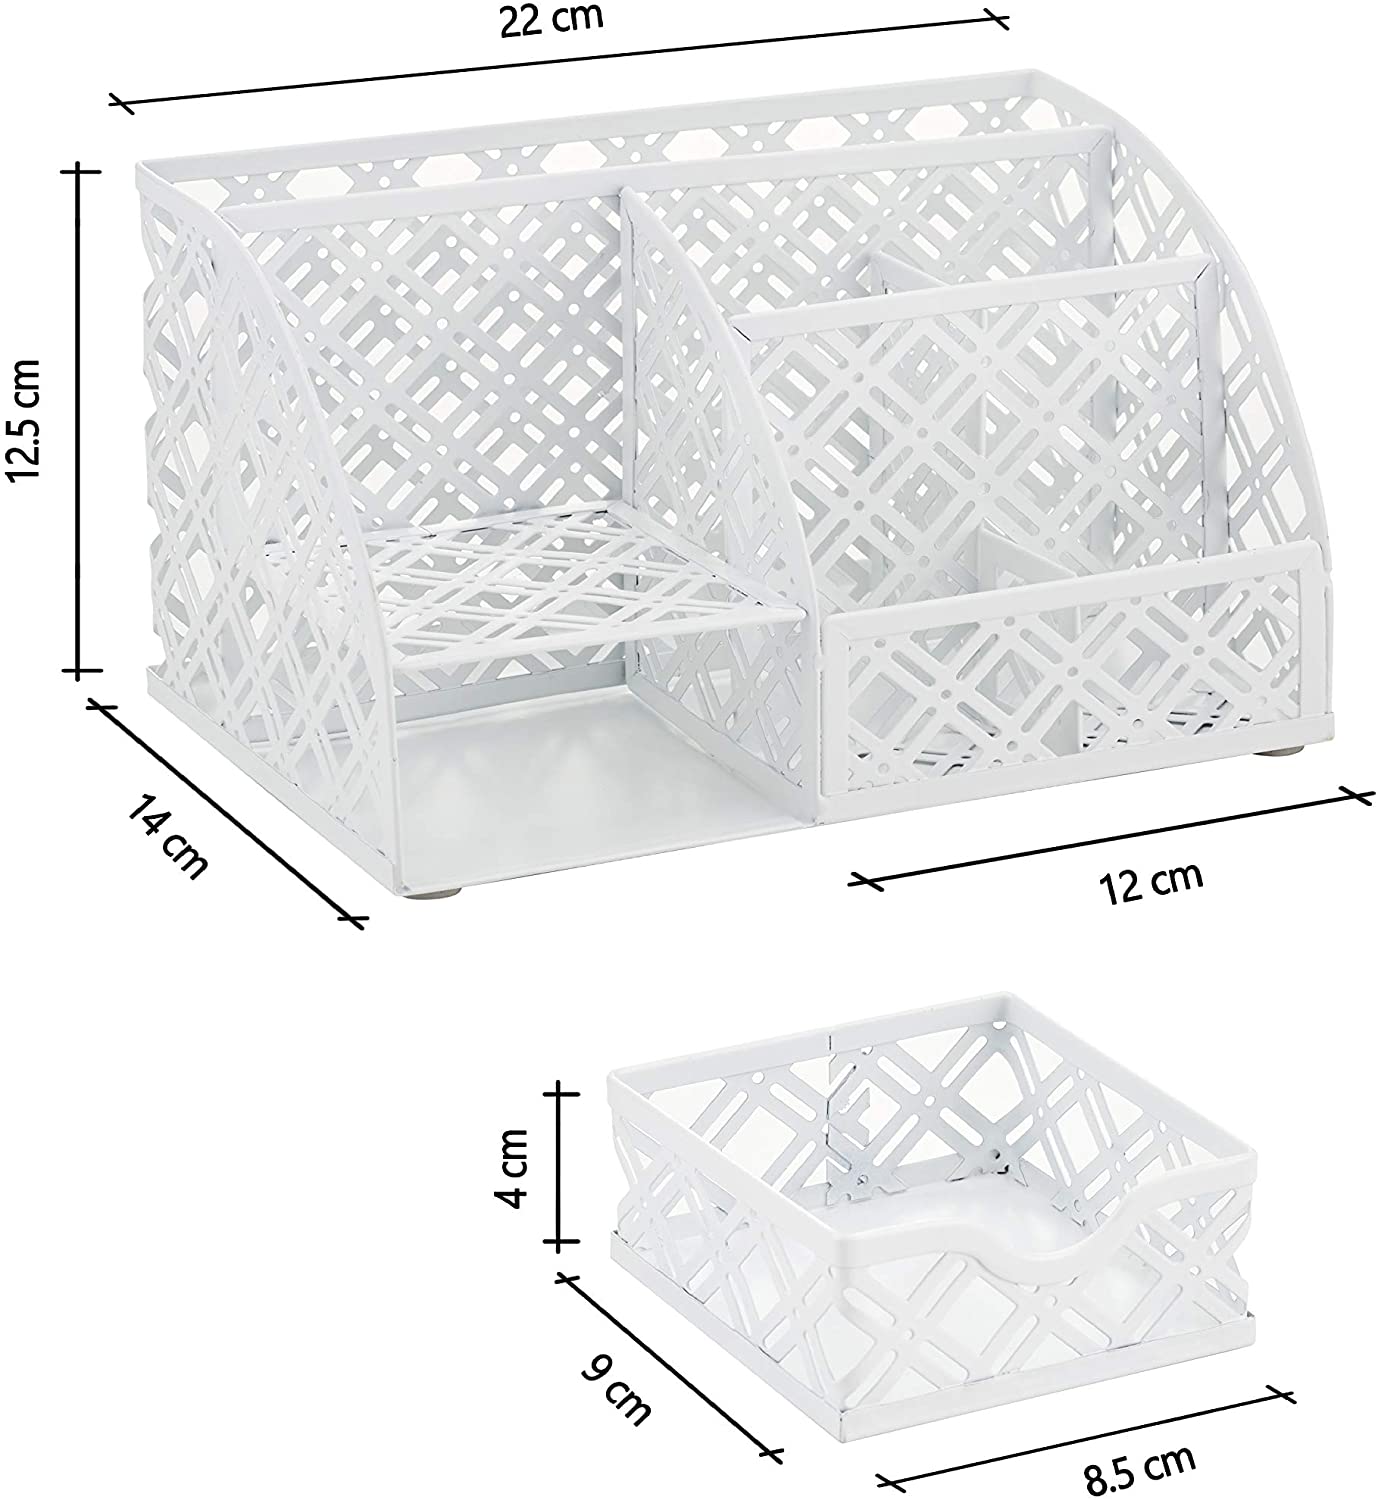 EXERZ Desk Organiser with 7 Compartments -Mesh Desk Tidy Caddy  - White